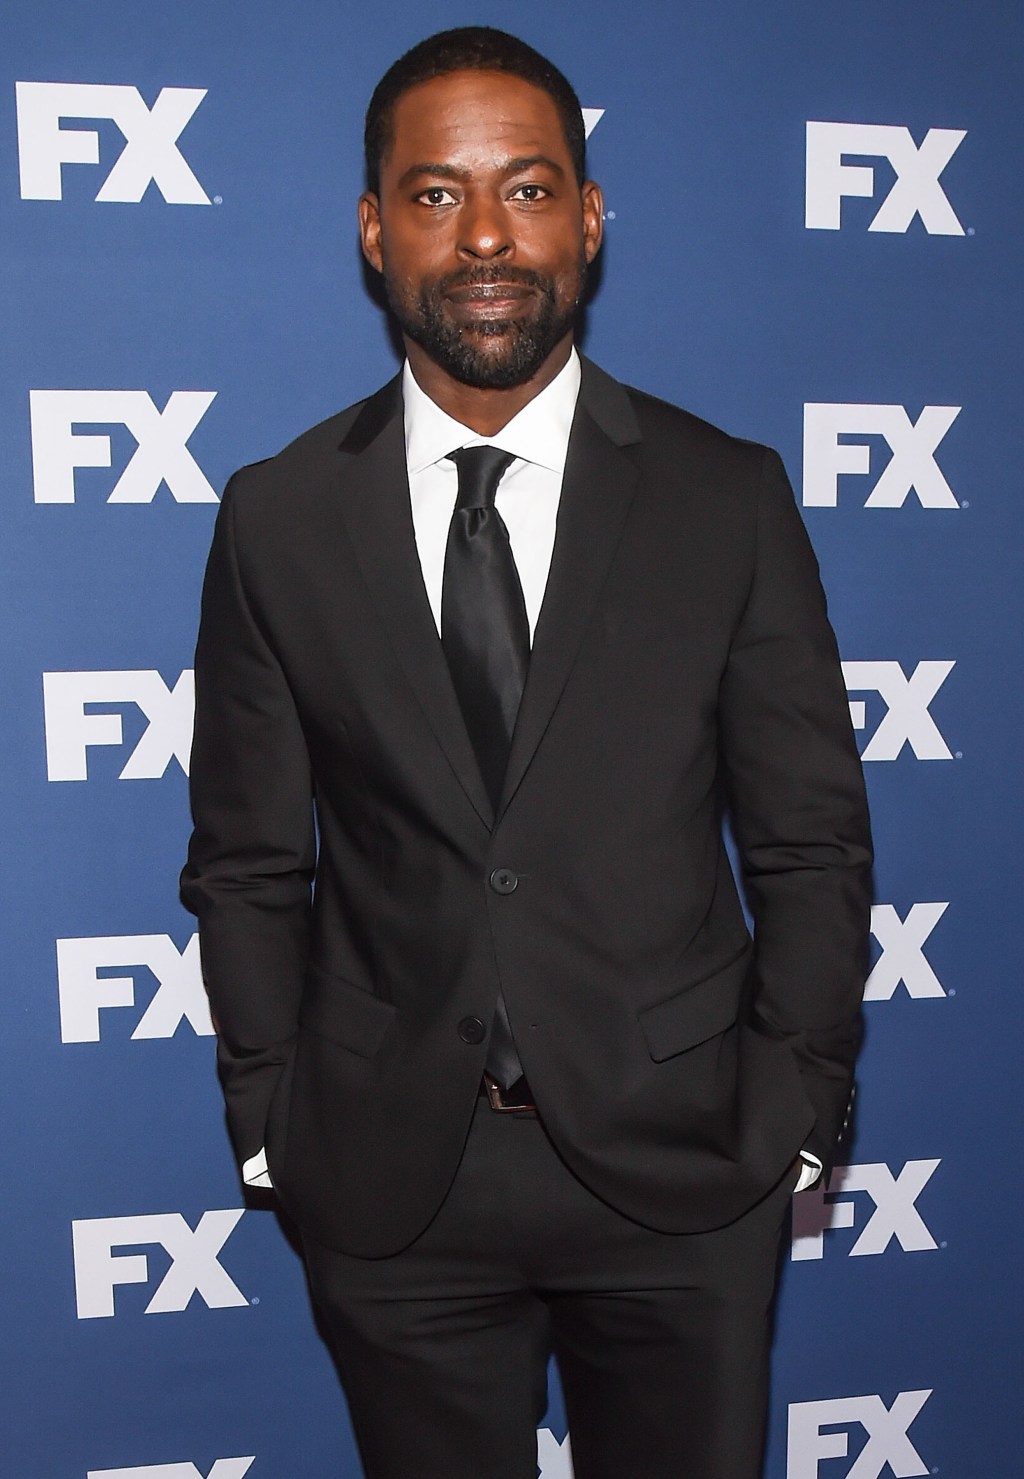 FX Networks Upfront Screening Of 'The People v. O.J. Simpson: American Crime Story'